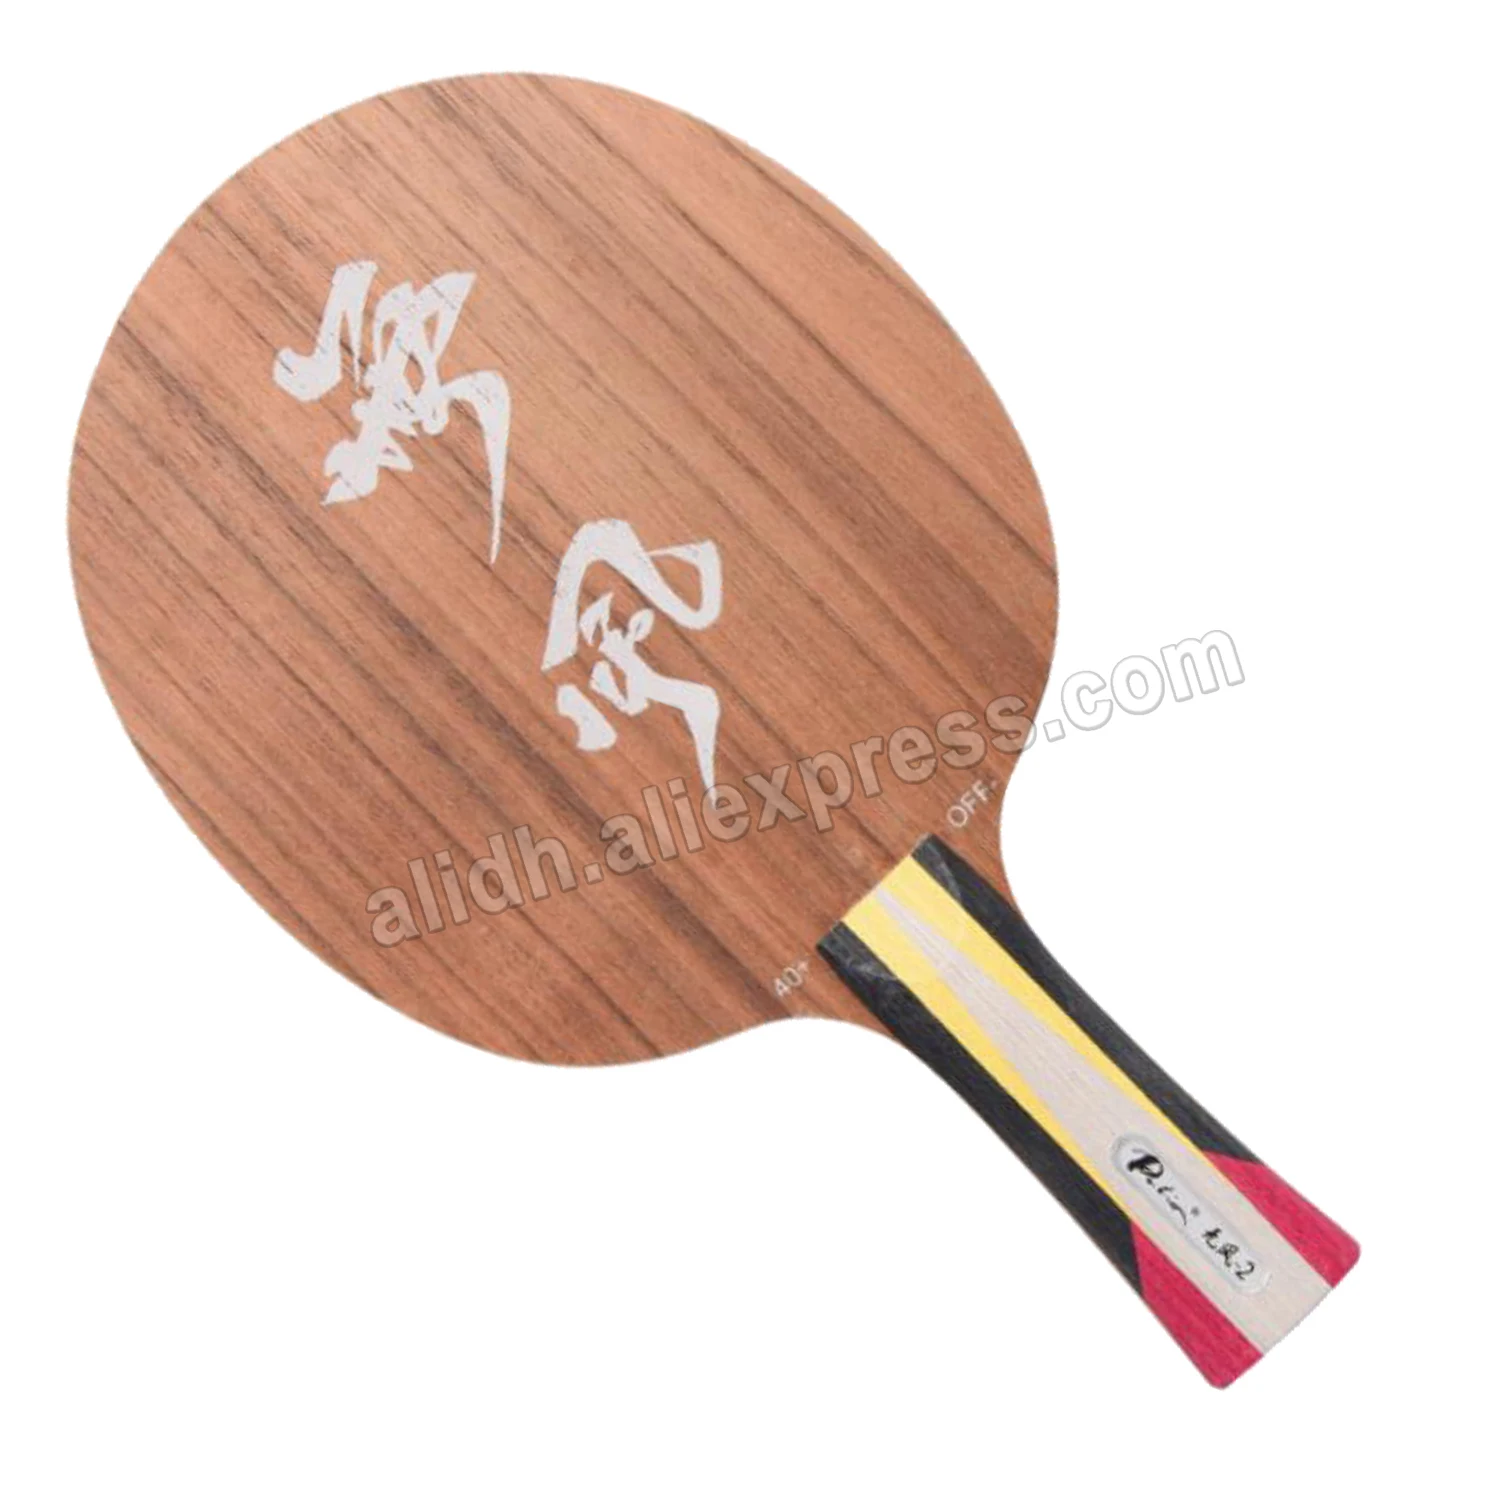 

Palio calm 02 calm-2 table tennis blade 5wood 2carbon blade fast attack with loop ping pong game